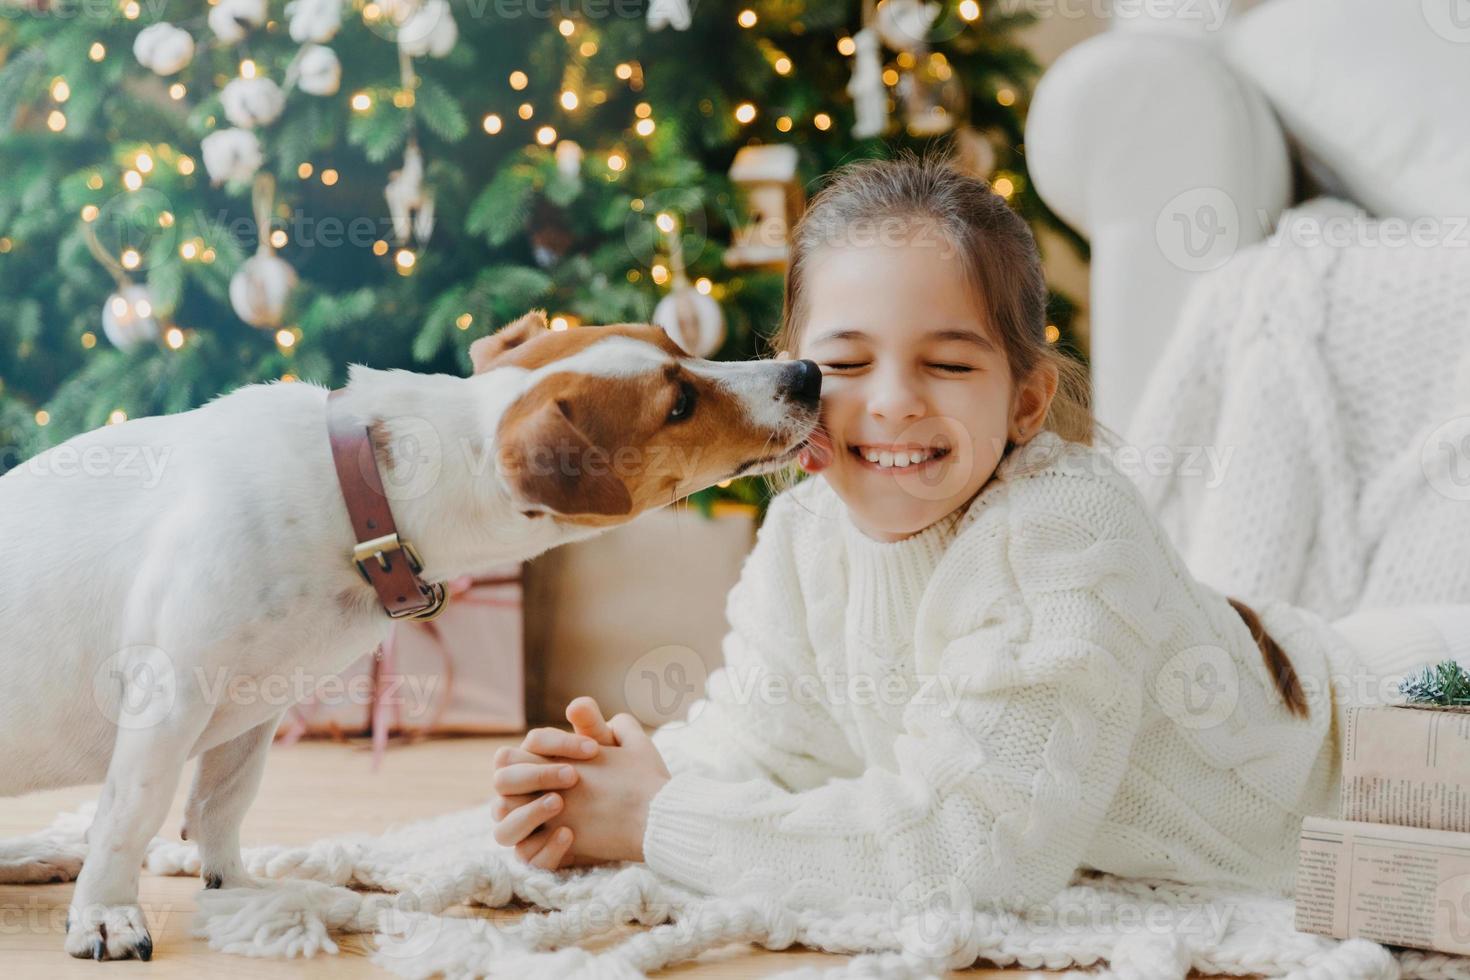 Lovely puppy licks chillds face have fun together pose on floor in cozy room against decorated fir tree, present boxes. Happy New Year concept. Beginning of winter holidays. Christmas preparation photo